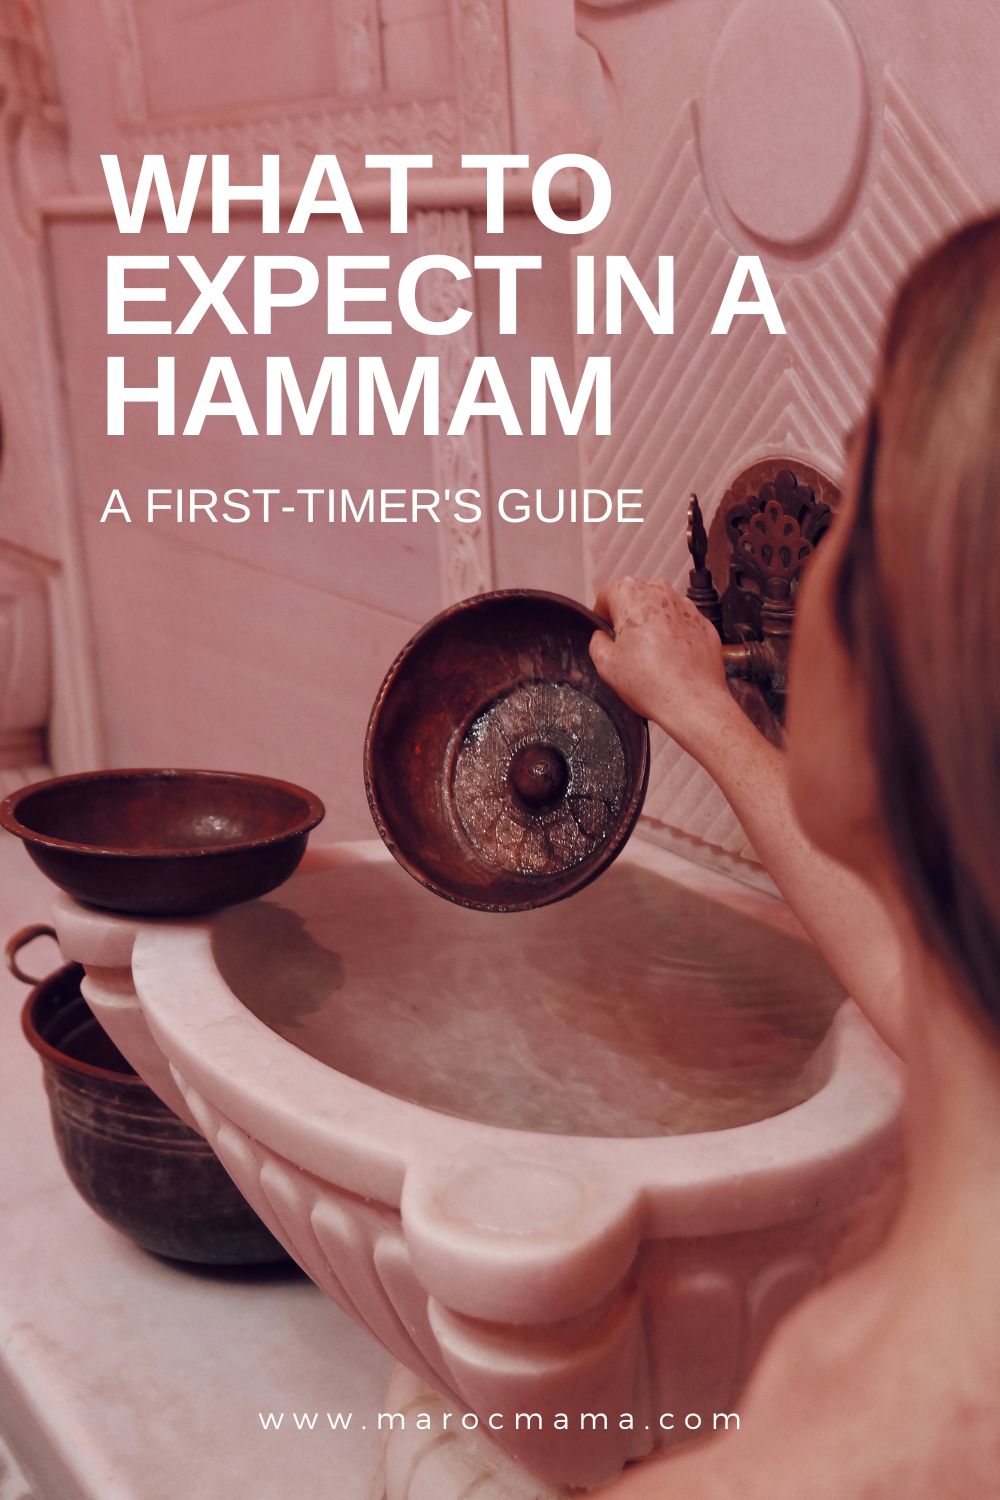 Woman relaxing in Hammam with the text What to Expect in a Hammam: A First Timer’s Guide